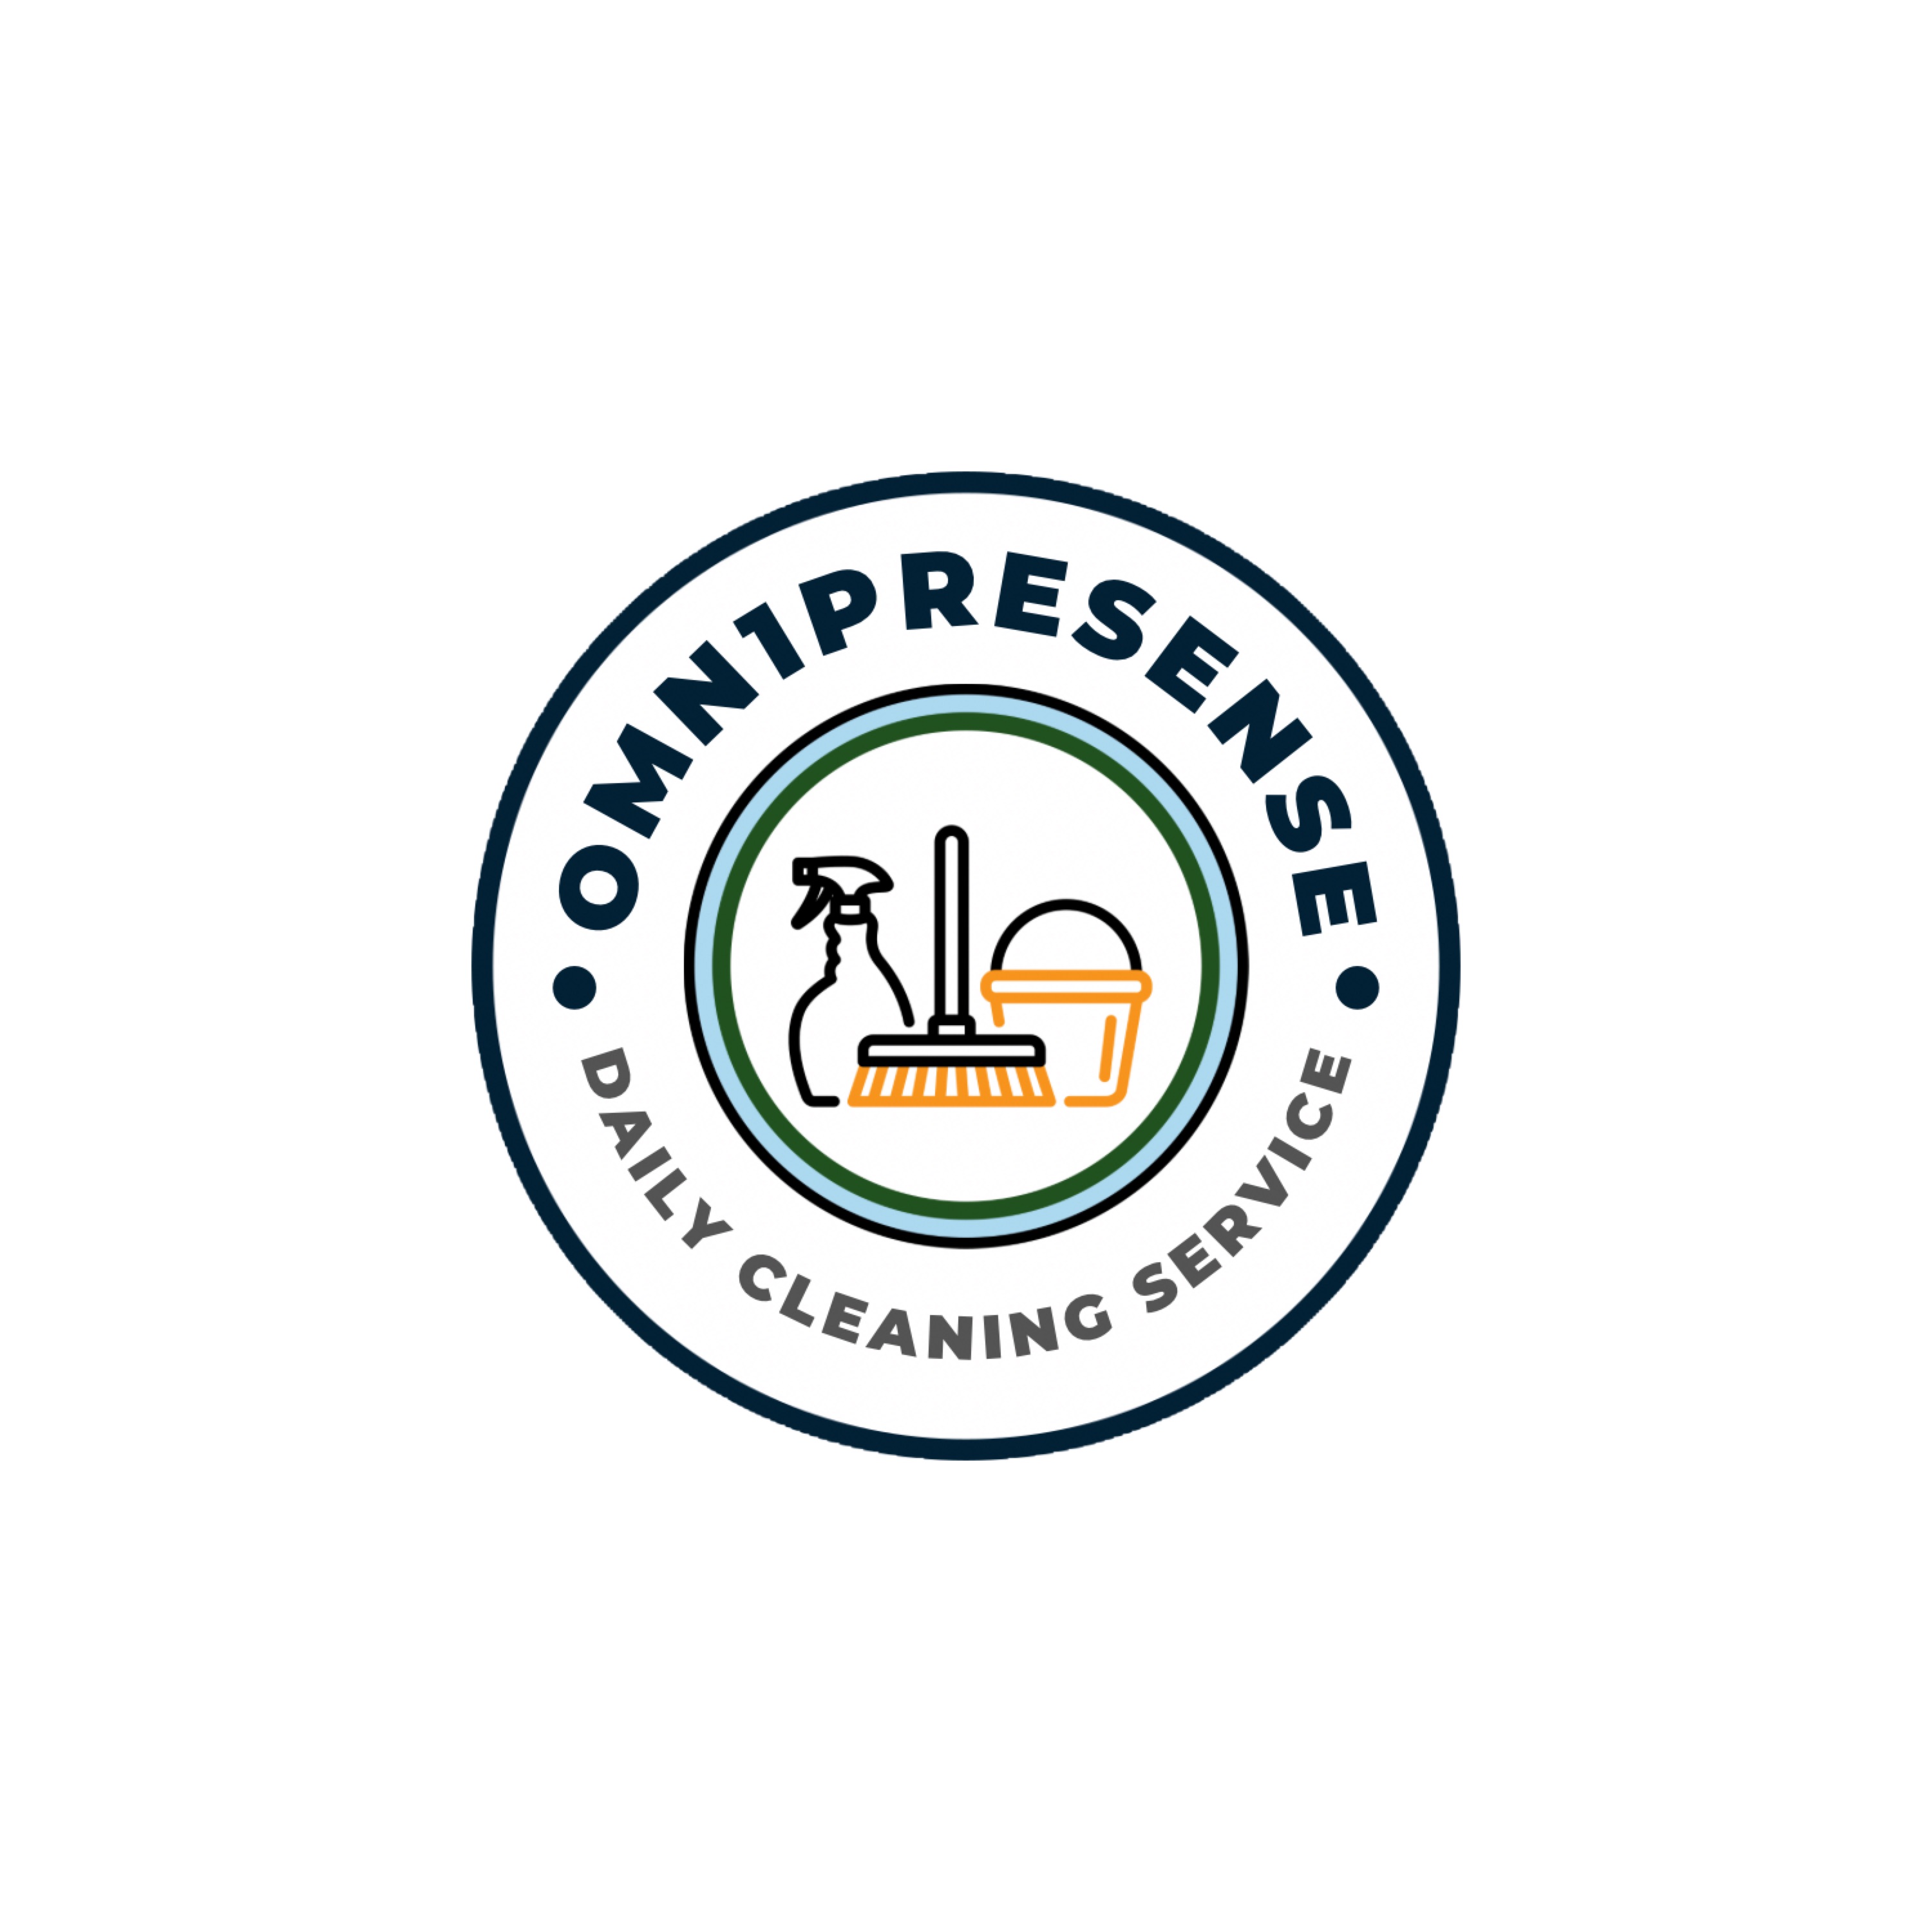 Omn1 Presence Cleaning Services of Grand Strand Logo